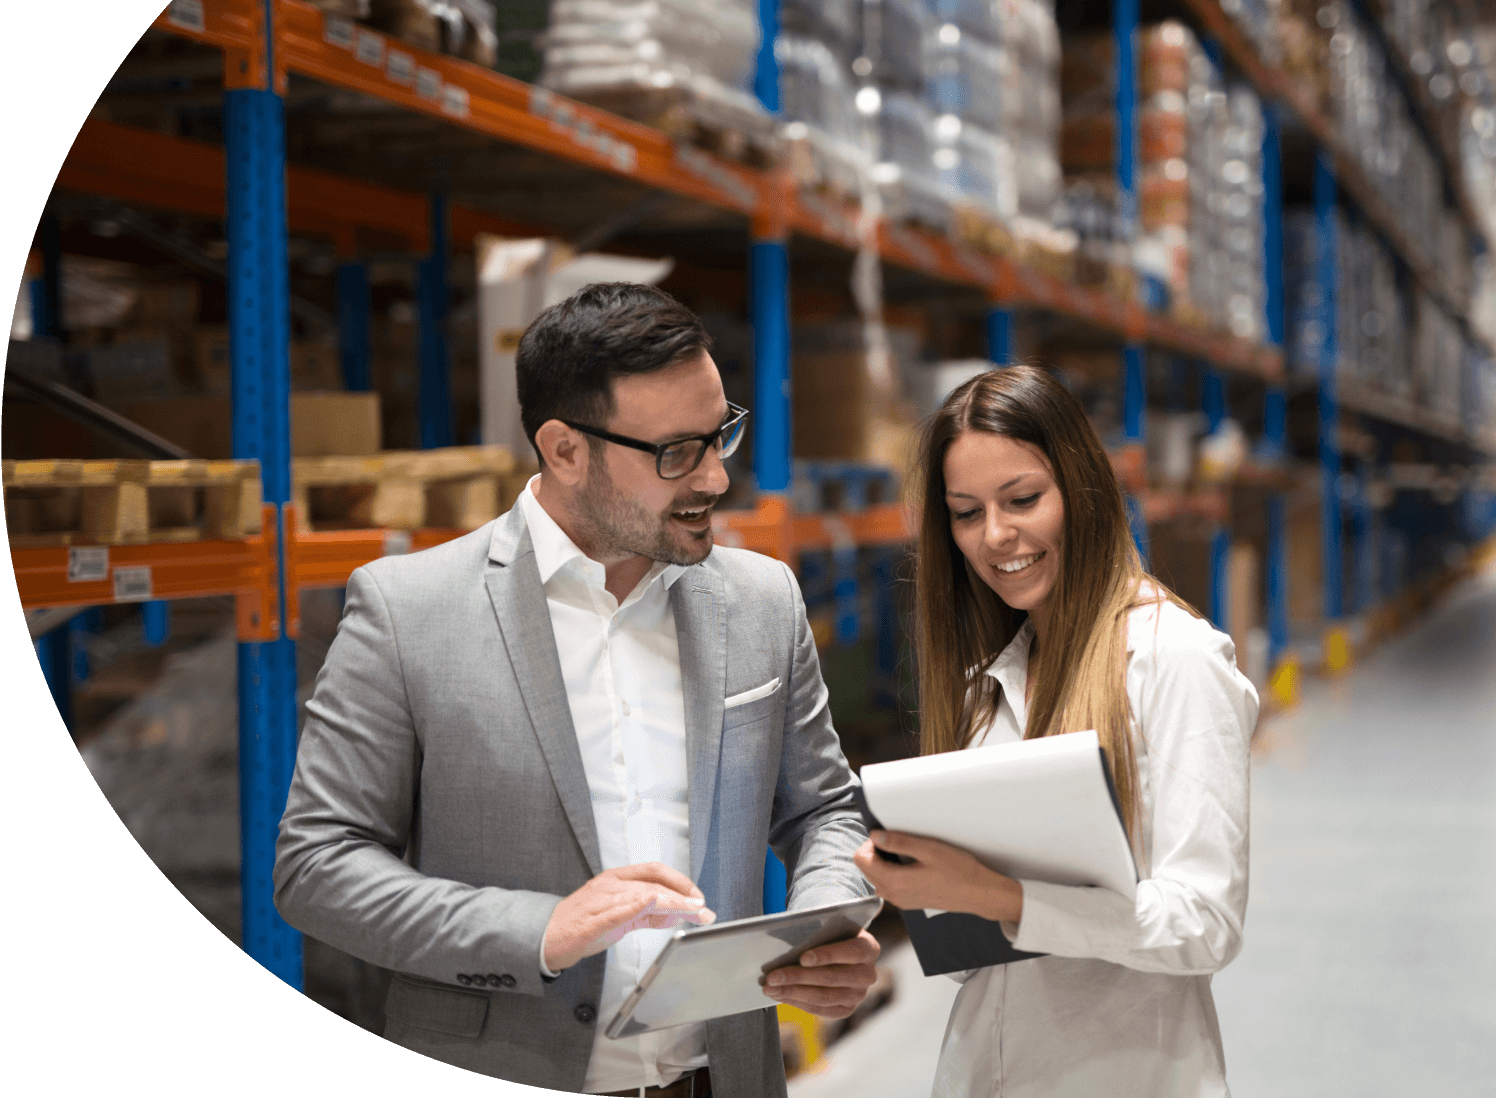 Industry finance solutions from Millbrook - Warehouse workers